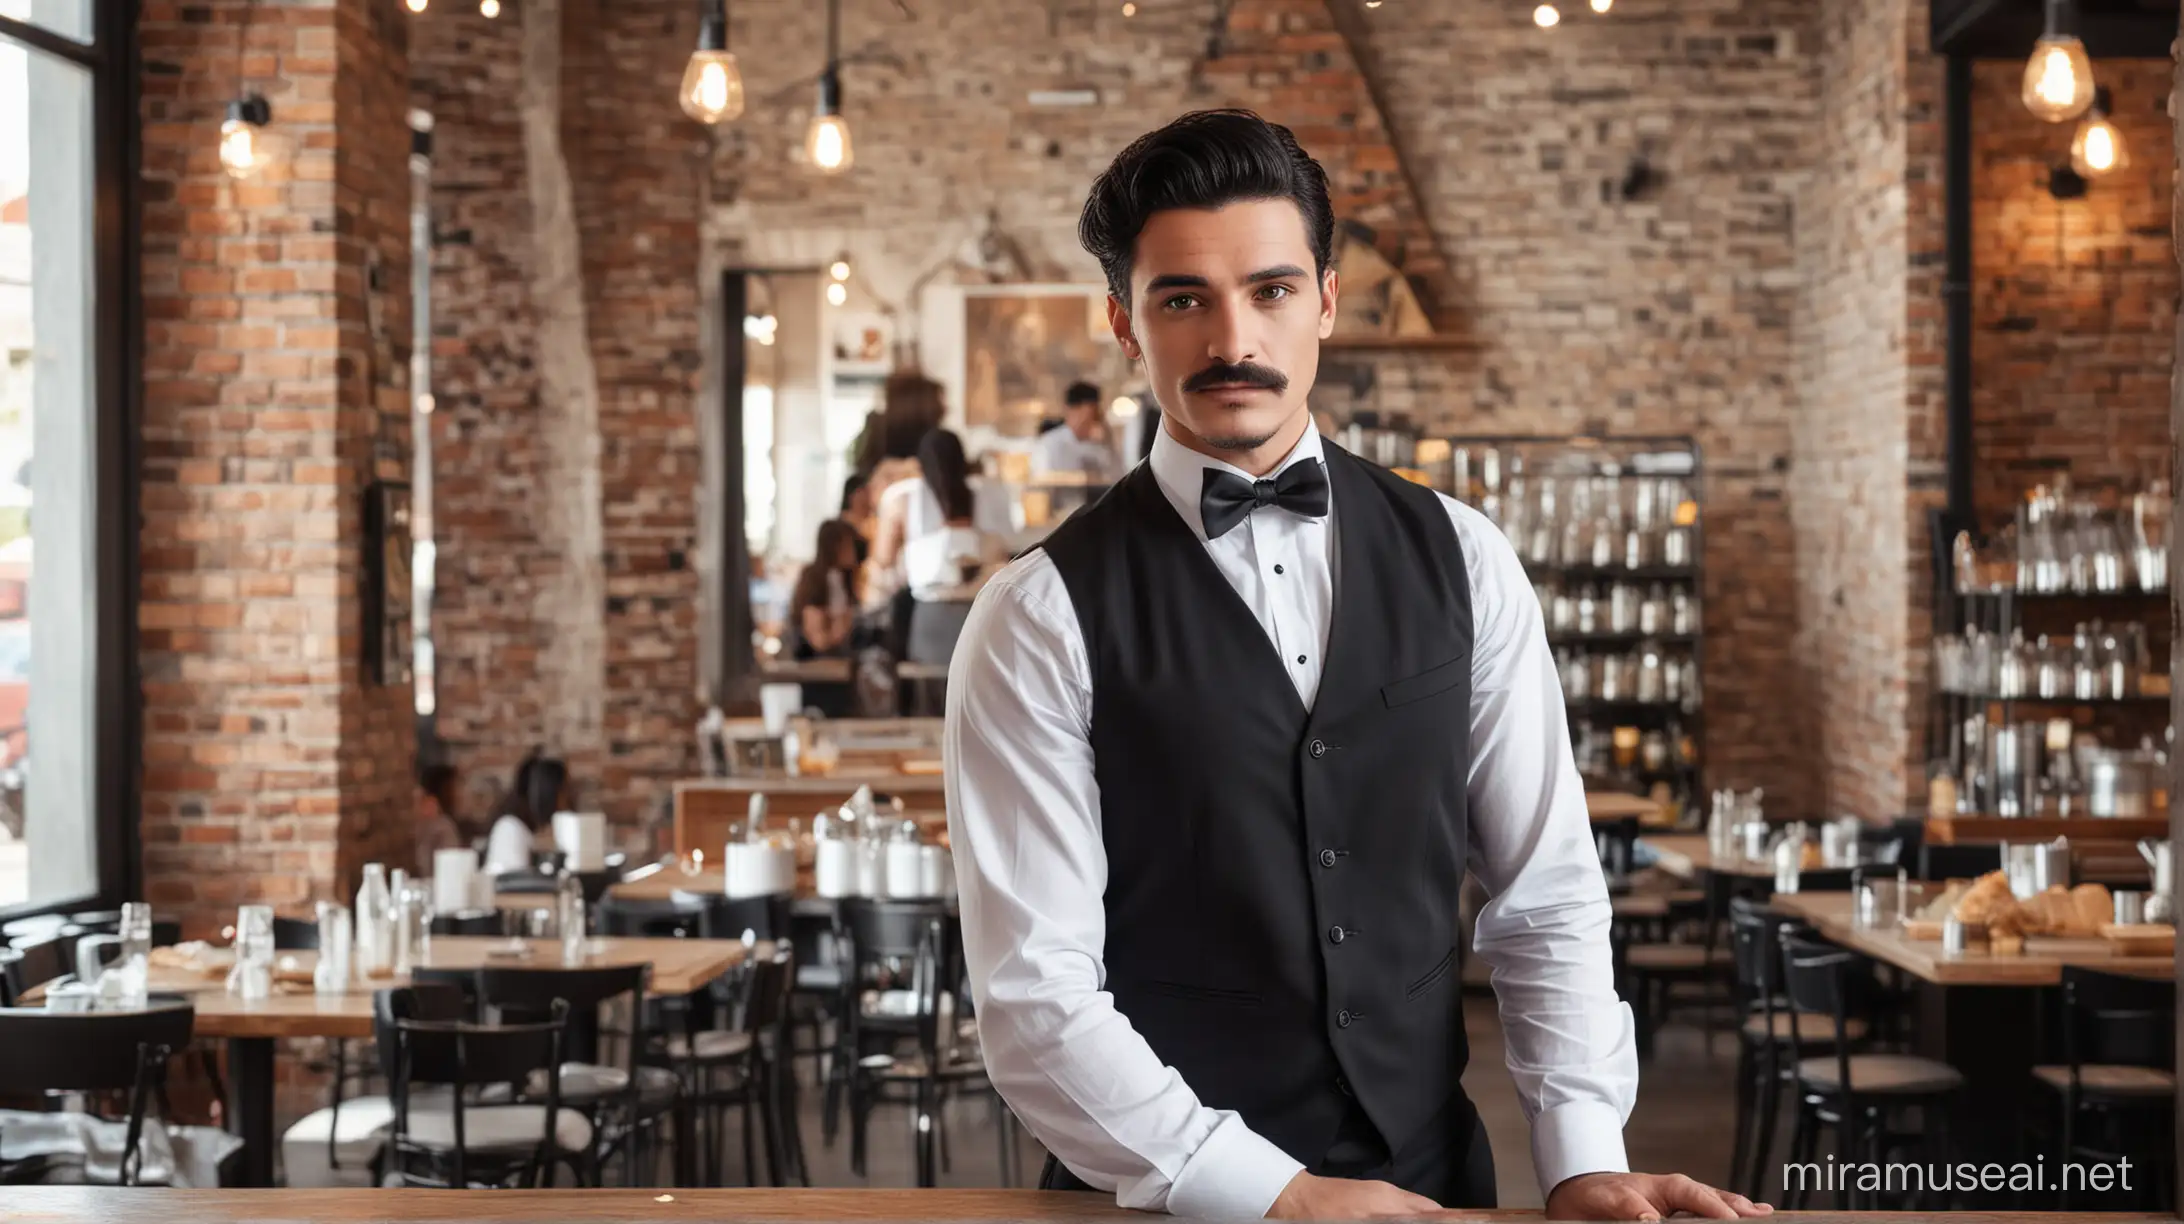 
Waiter with black hair, pyramid mustache, wearing a black vest, white shirt, black bowtie and black trousers in an urban cafe background staring at camera